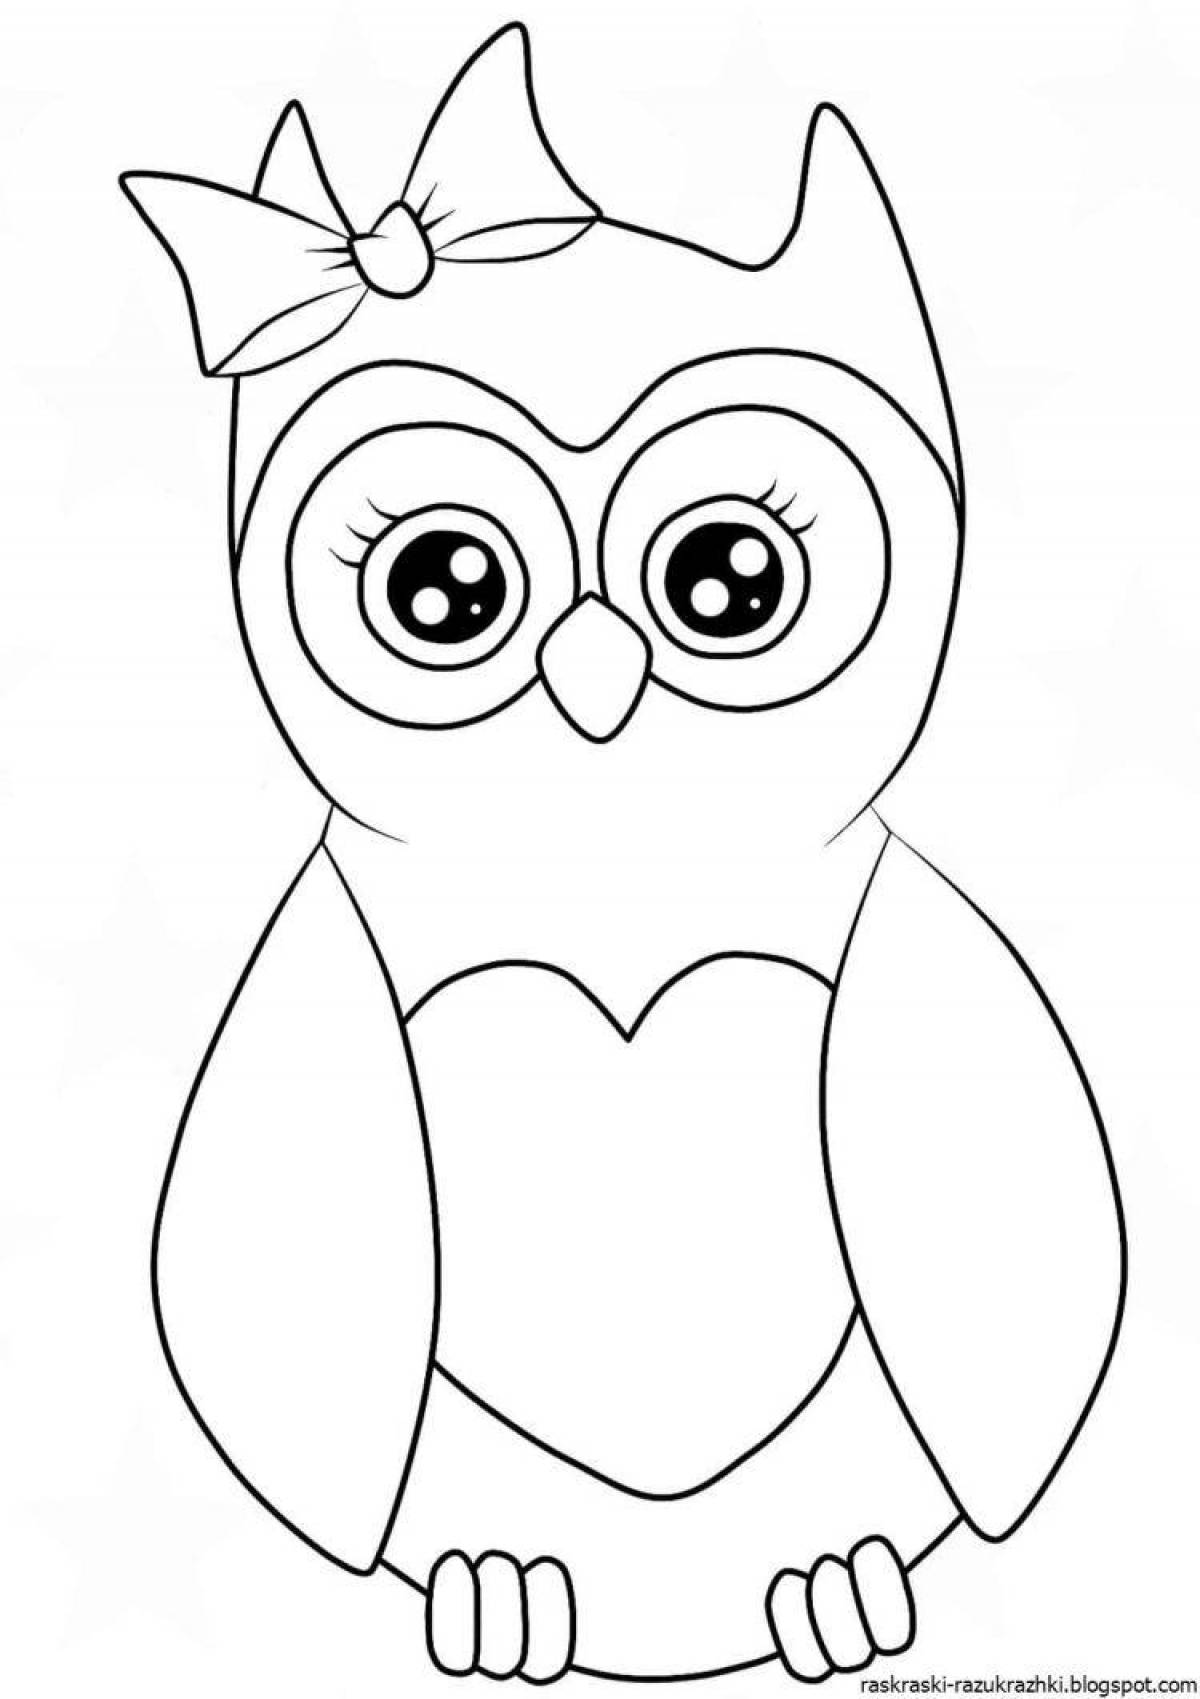 Fancy owlet coloring page